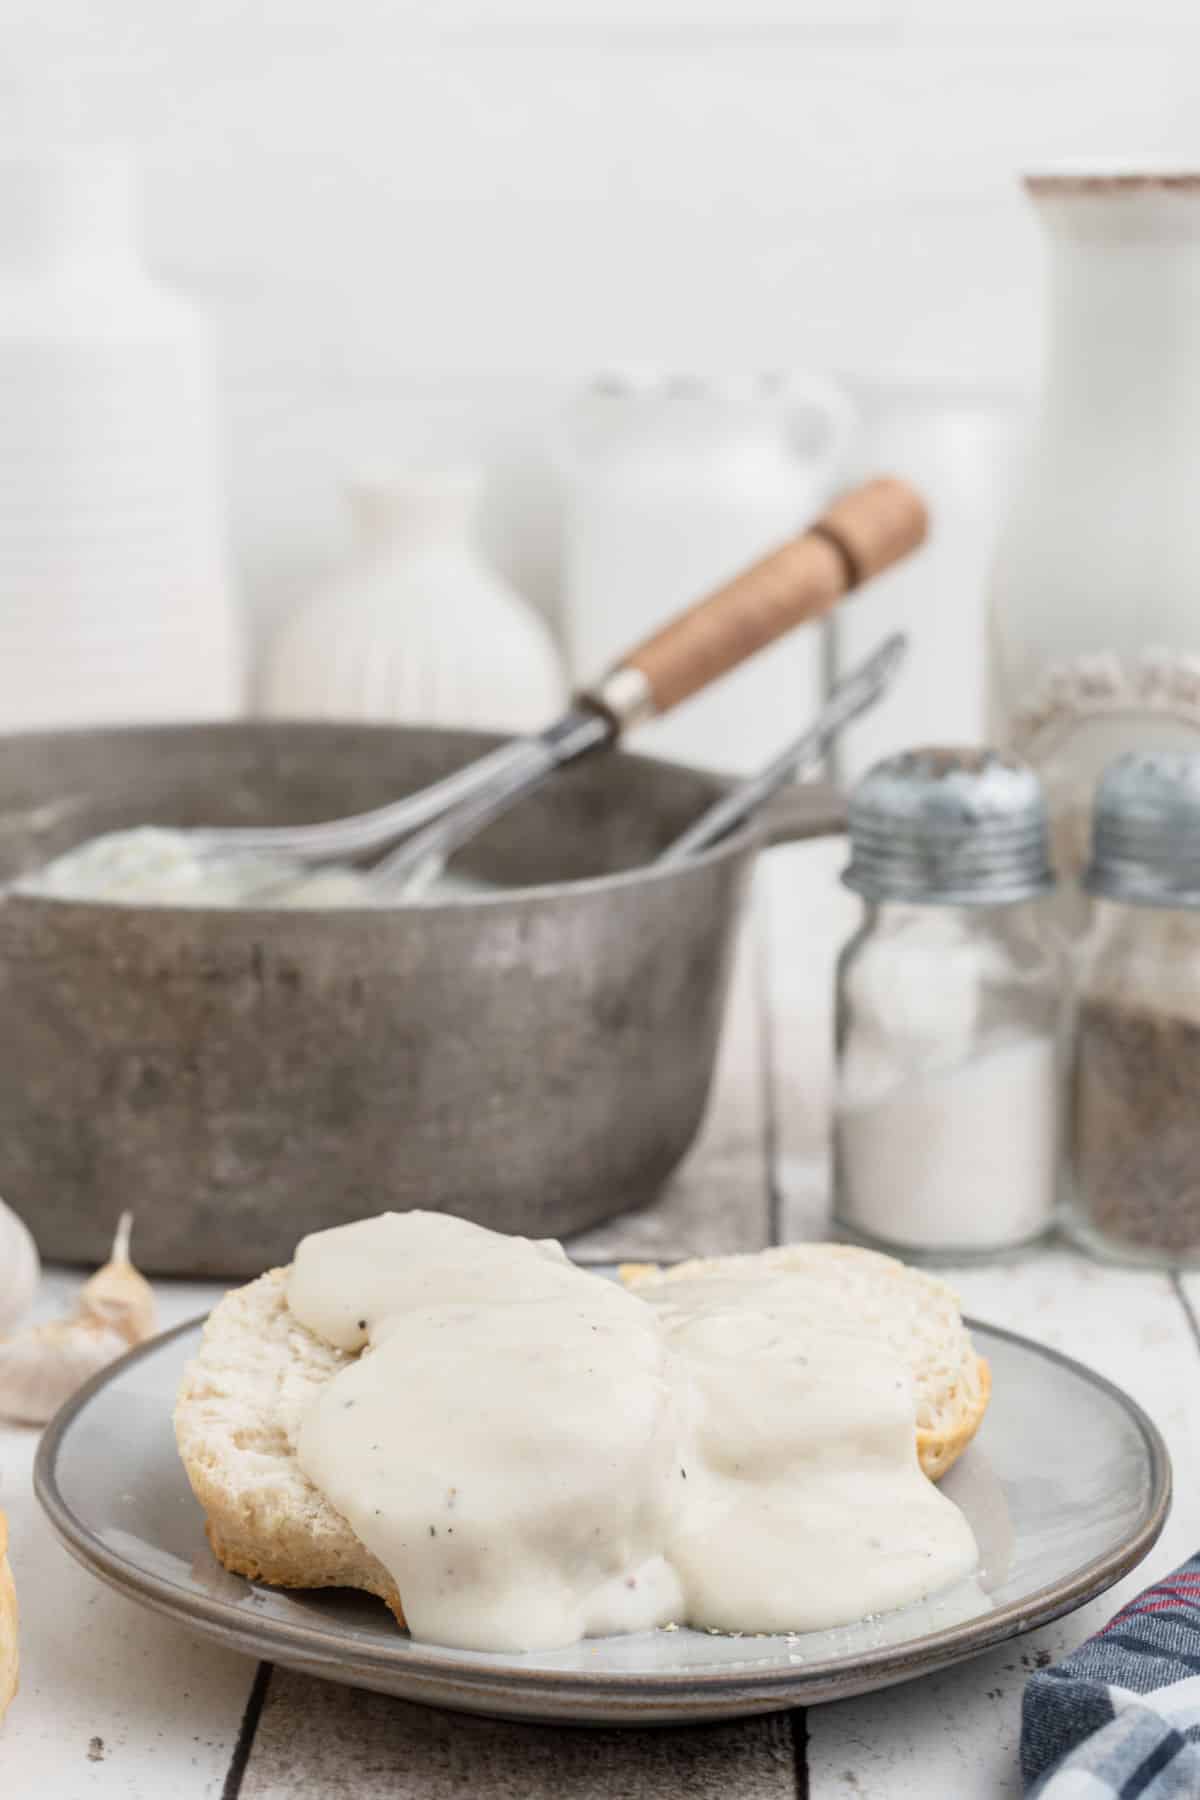 Southern white gravy poured over biscuits.